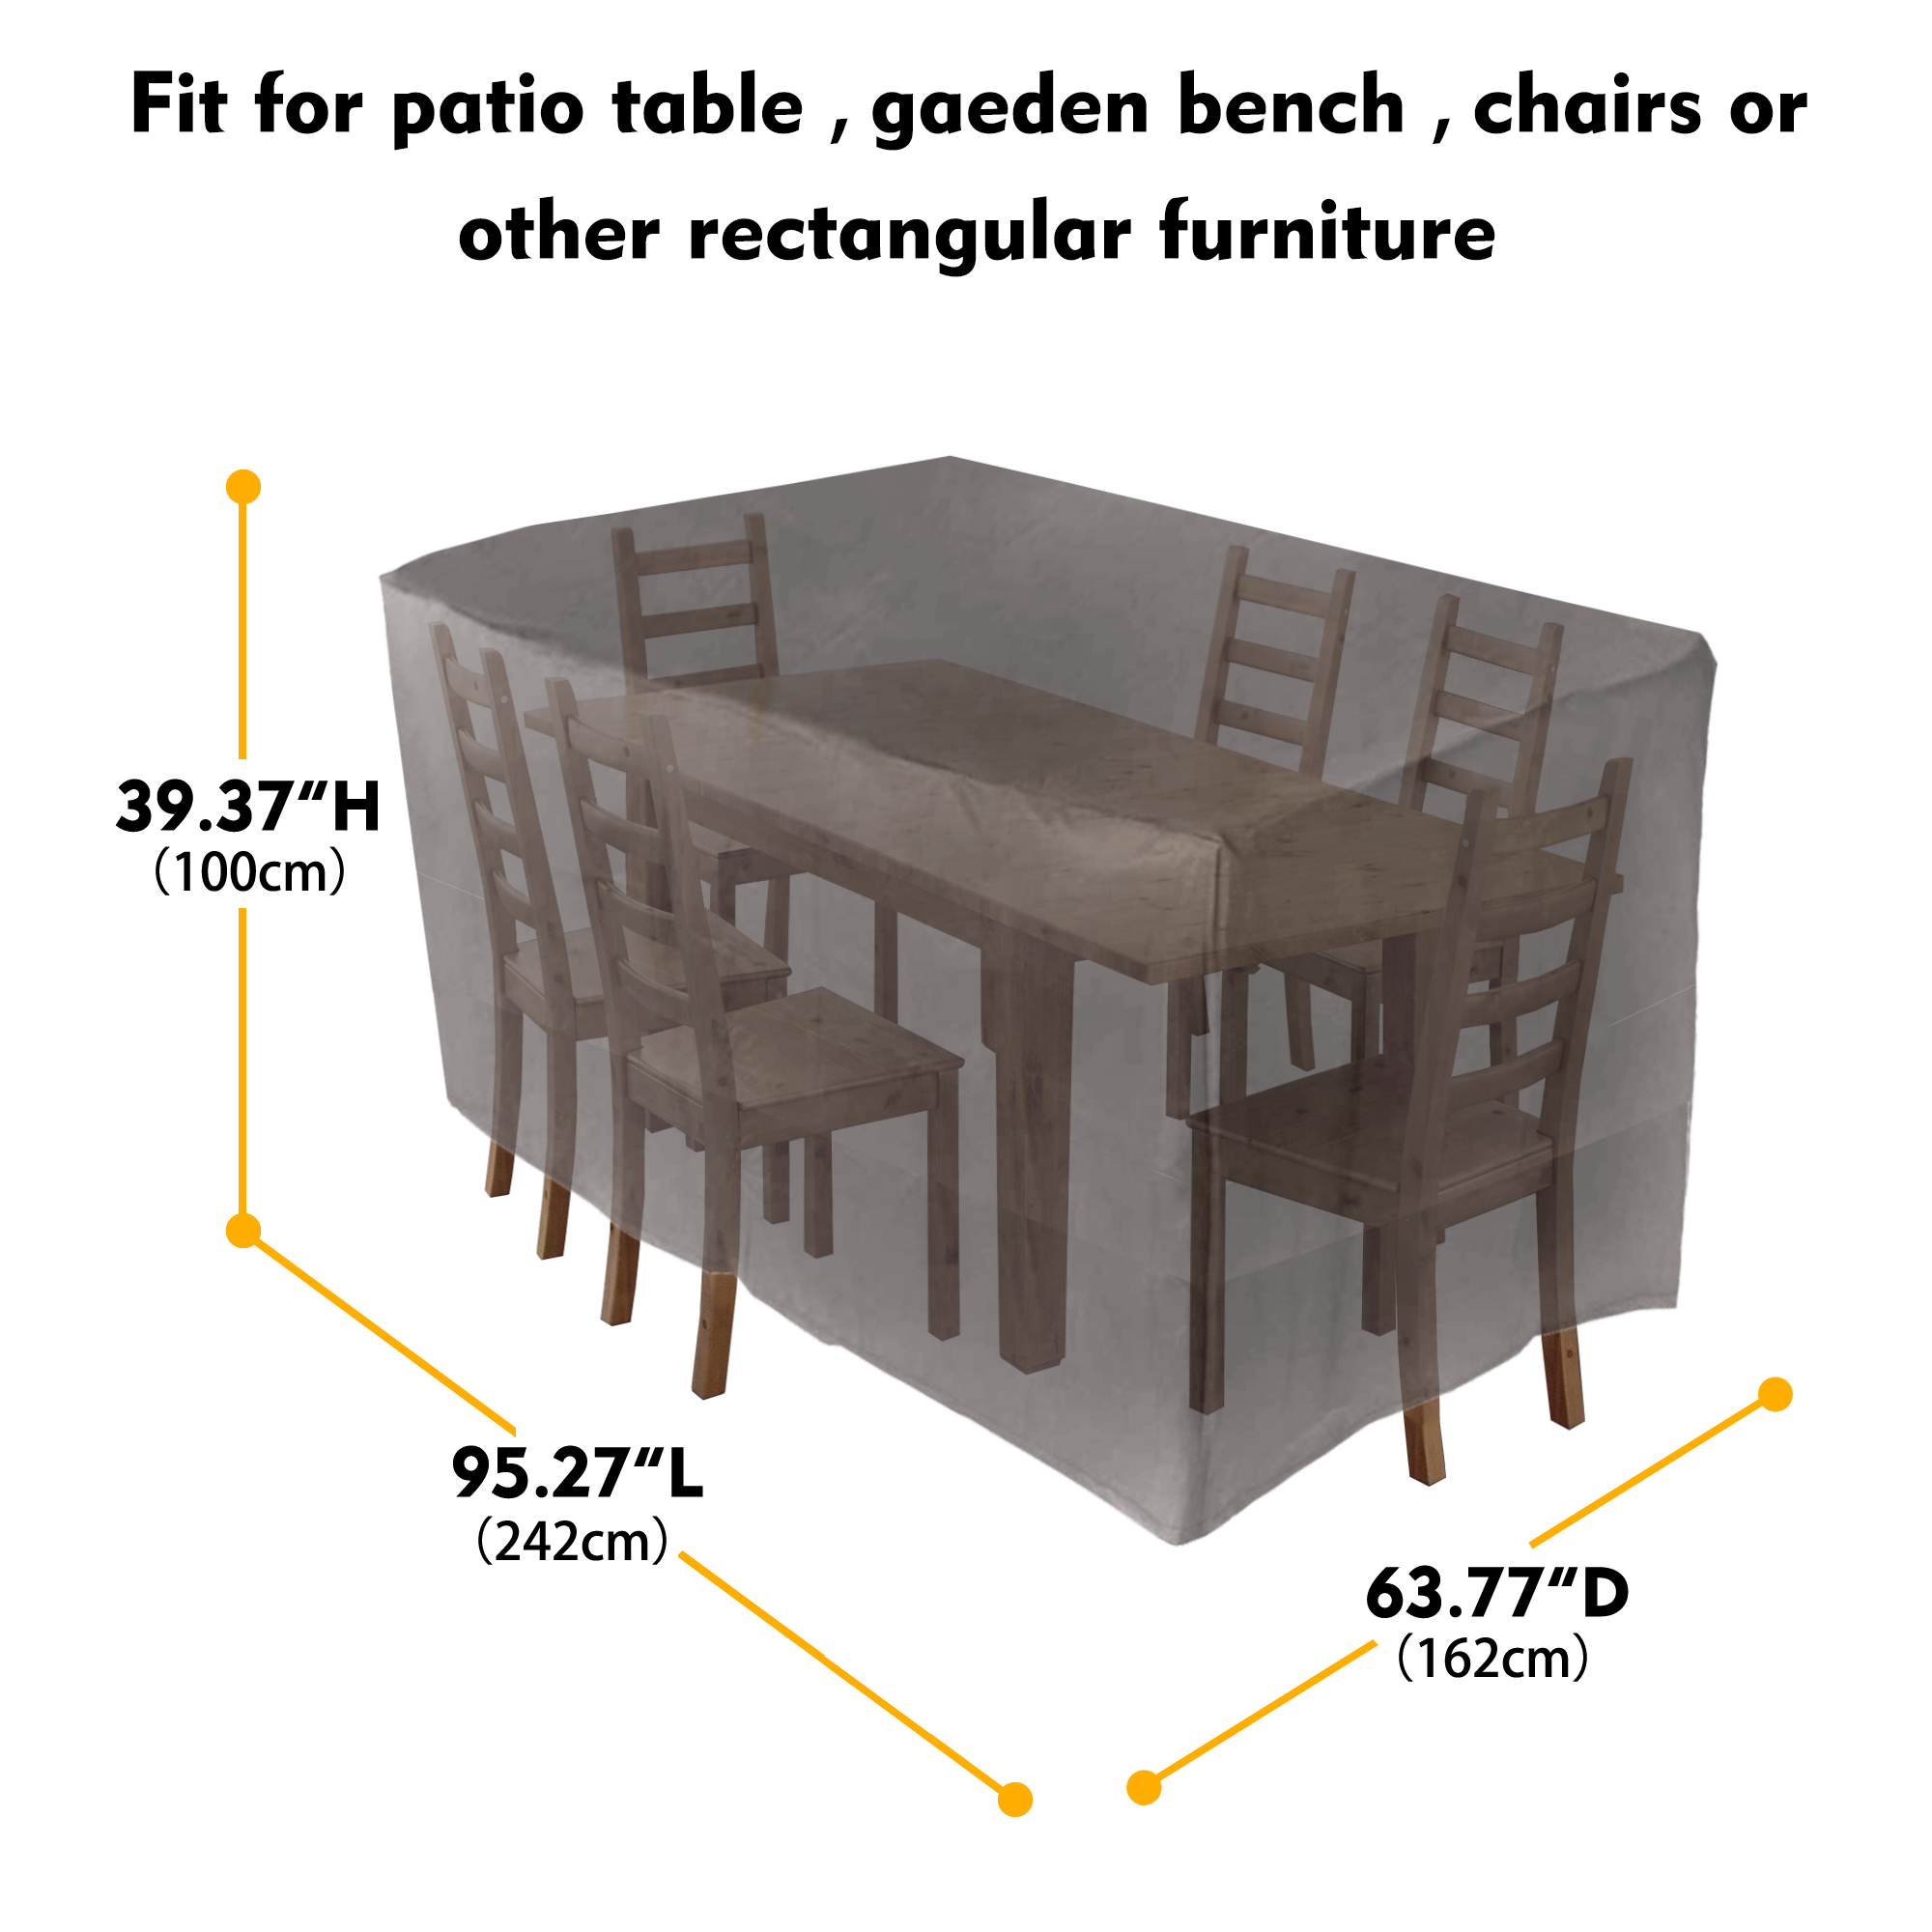 Tvird-242x162x100cm-Patio-Garden-Outdoor-Furniture-Set-Protector-Cover-Table-Chair-Waterproof-Cover-1661472-6